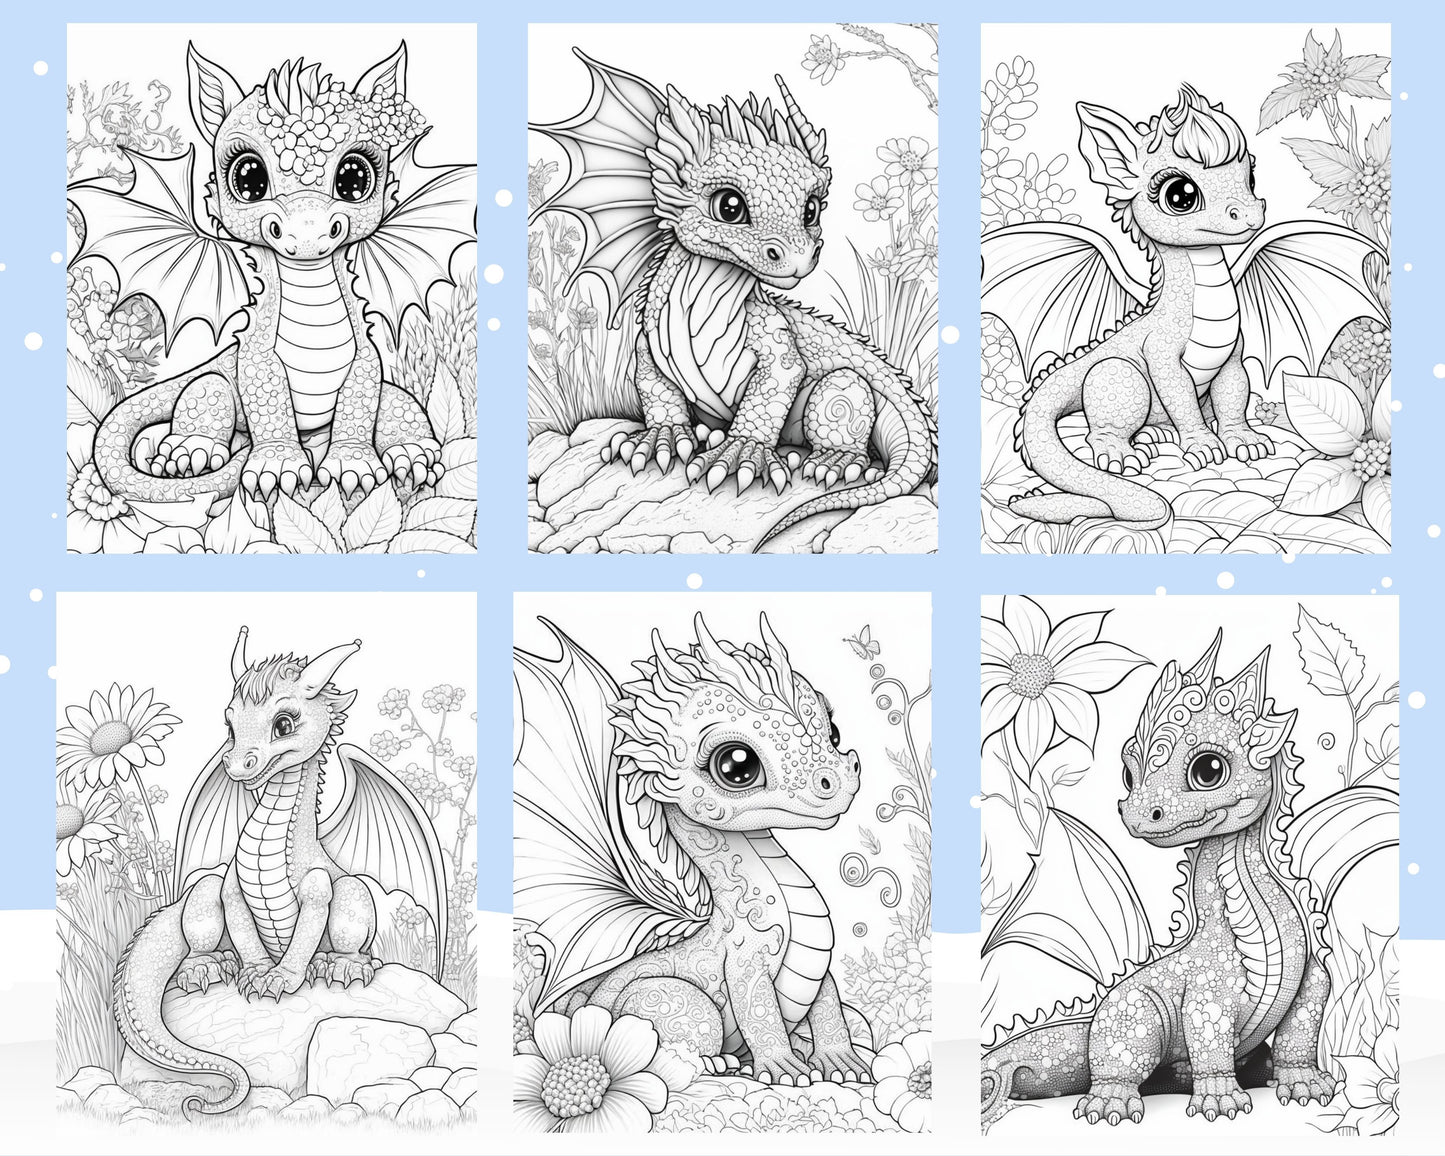 100 Adorable Dragon Printable Coloring Pages for Kids, Printable PDF File Instant Download - raspiee